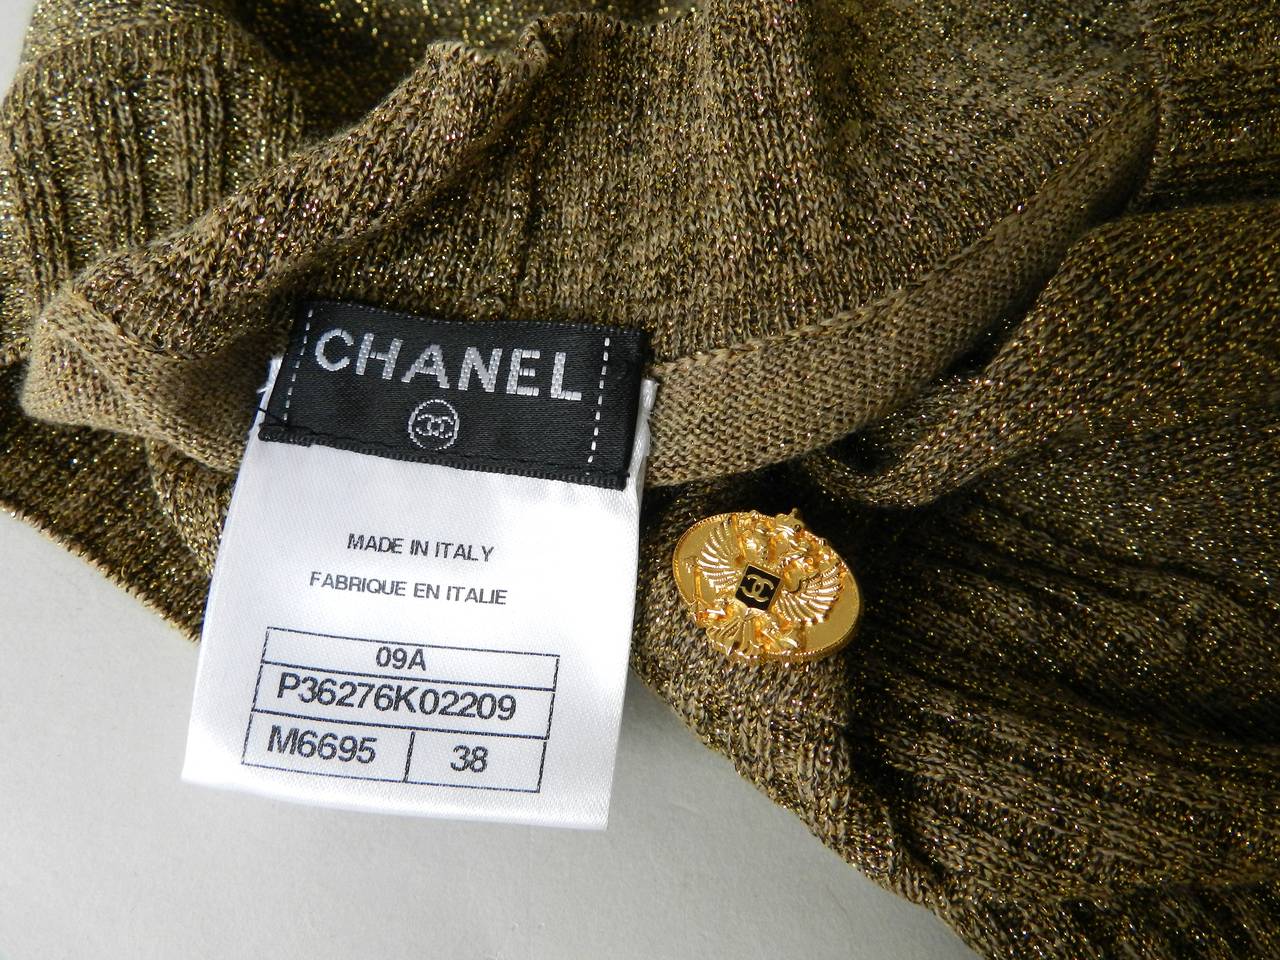 Chanel 09A Russian Collection Gold Knit Dress at 1stdibs